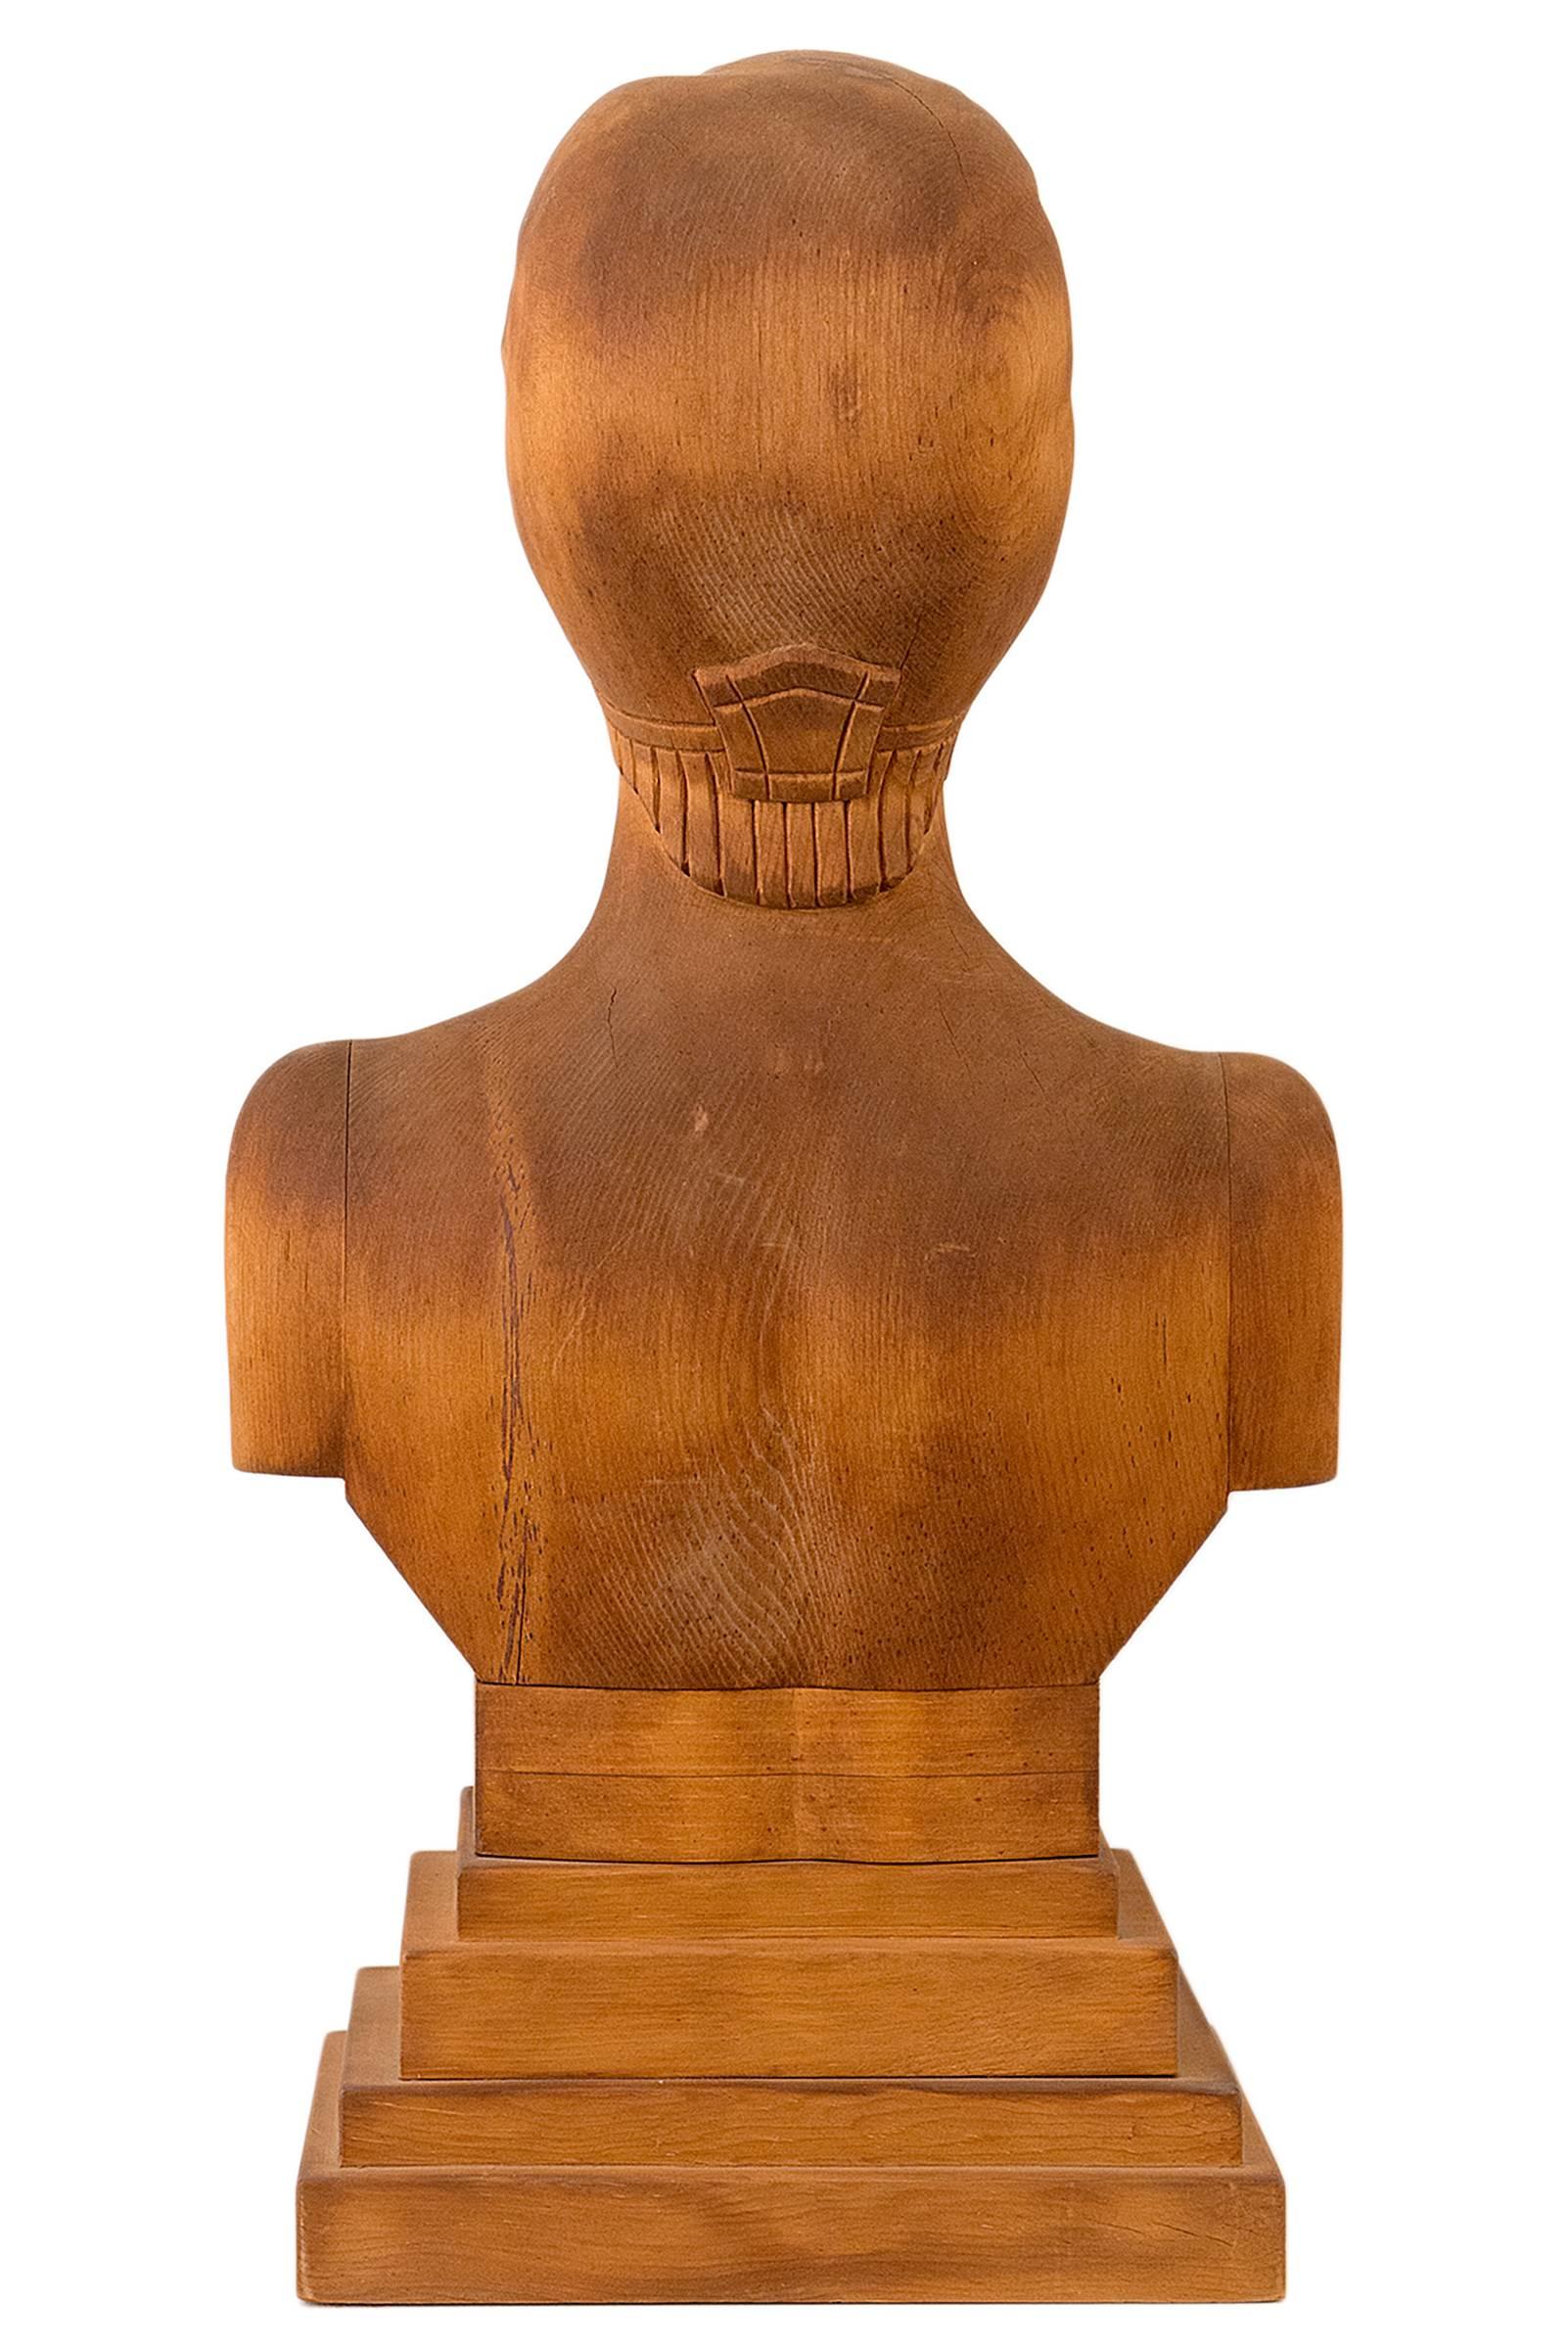 Unusual carved wooden portrait bust. A beautifully refined and reductive carving. Never painted having a natural nut brown patina.